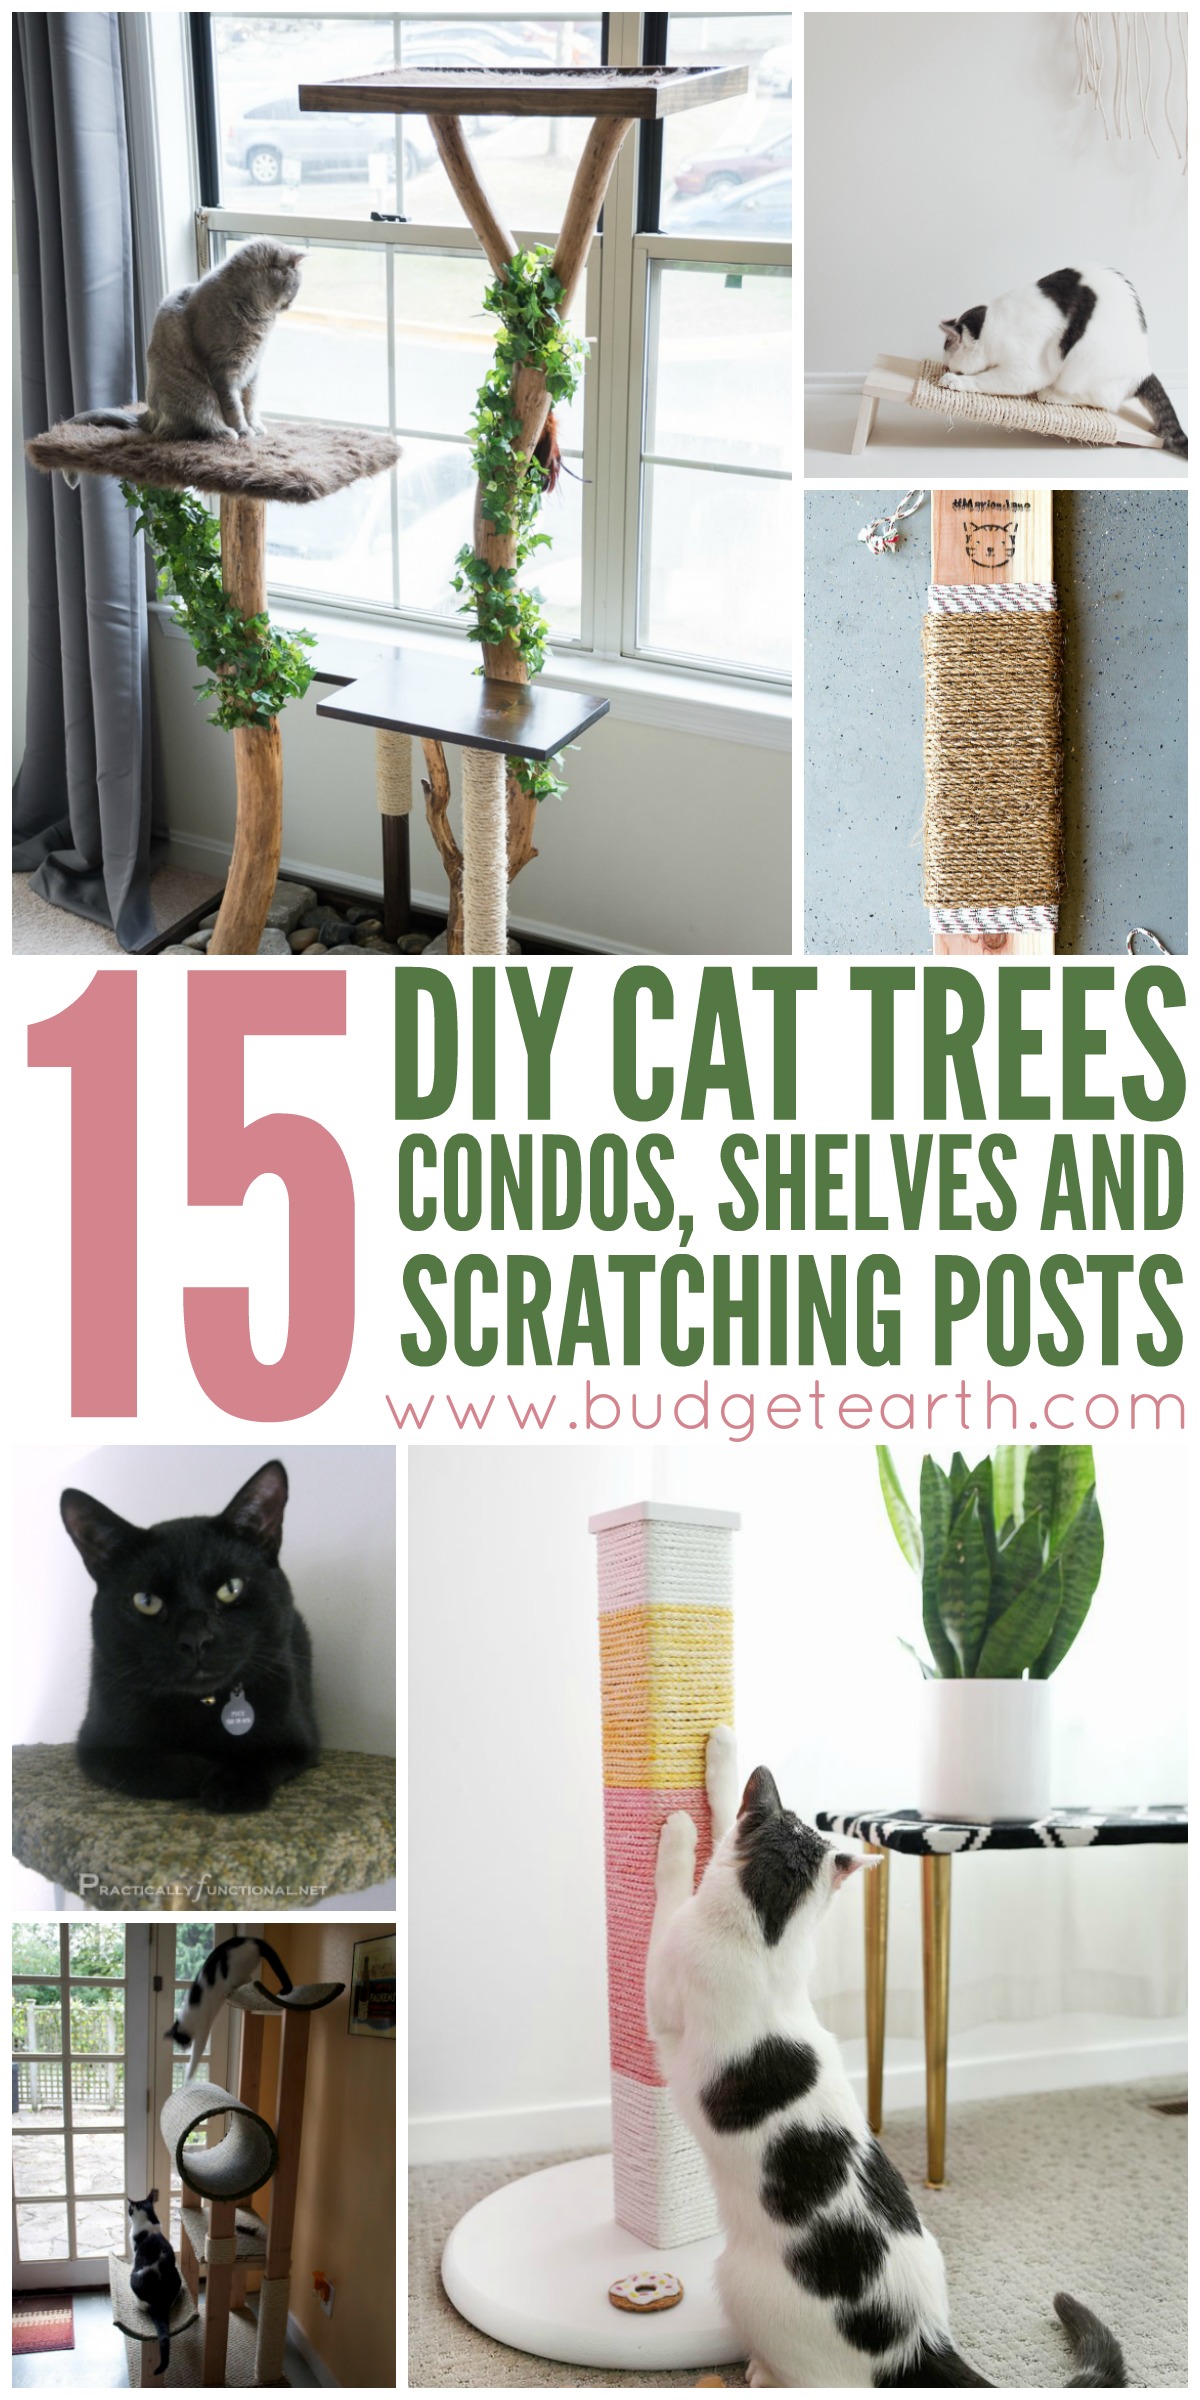 Want to spoil your cat? Check out these 15 DIY Cat Trees, Condos, and Scratching posts projects here!